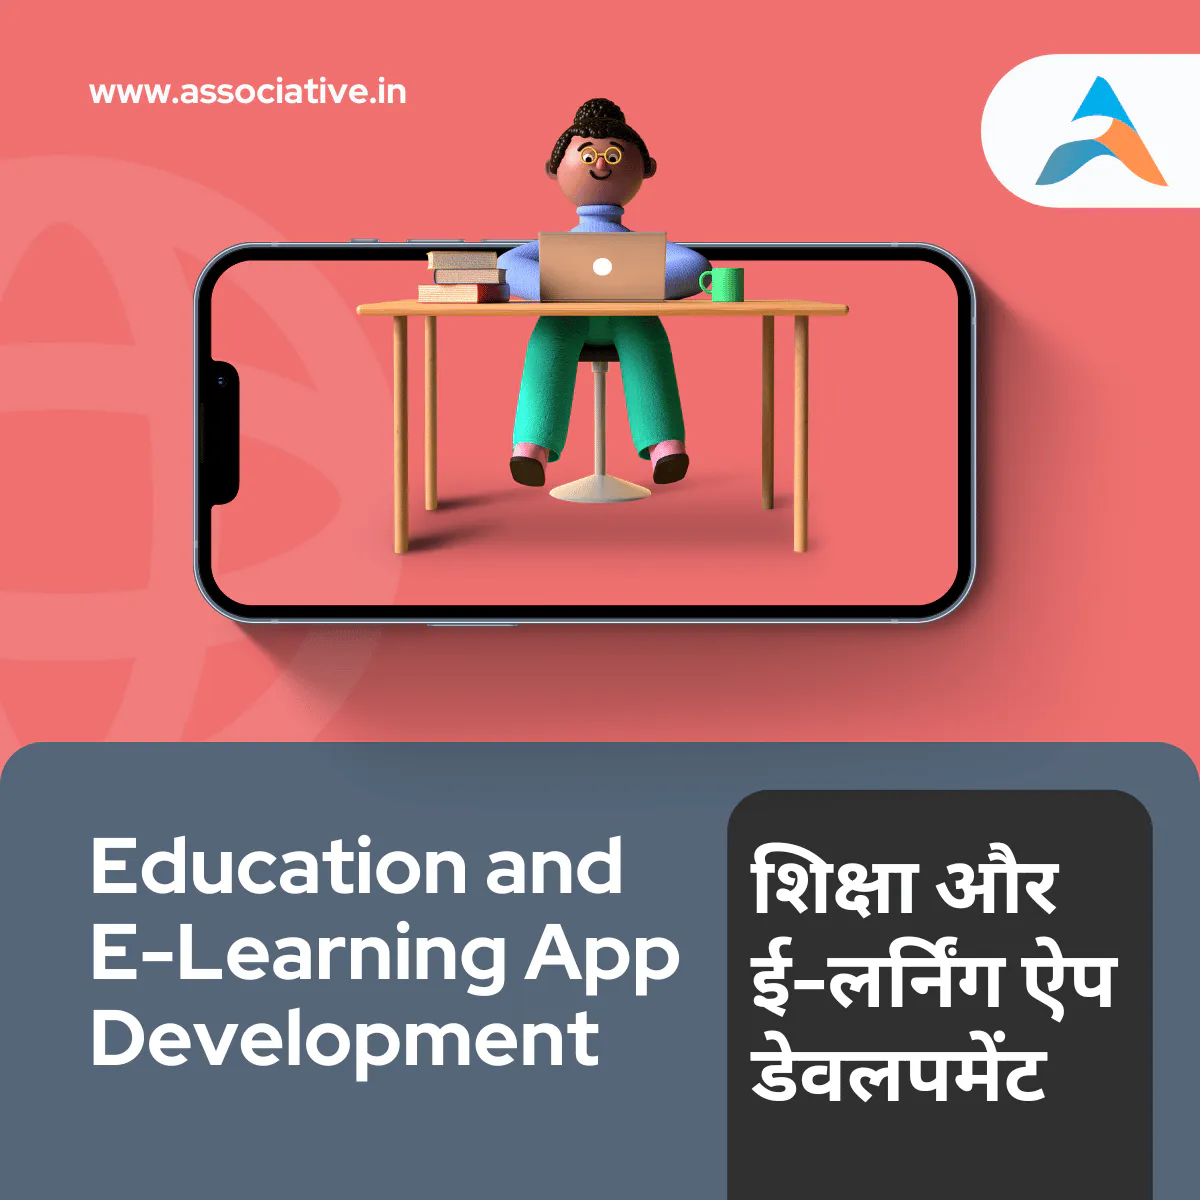 Education and E-Learning App Development